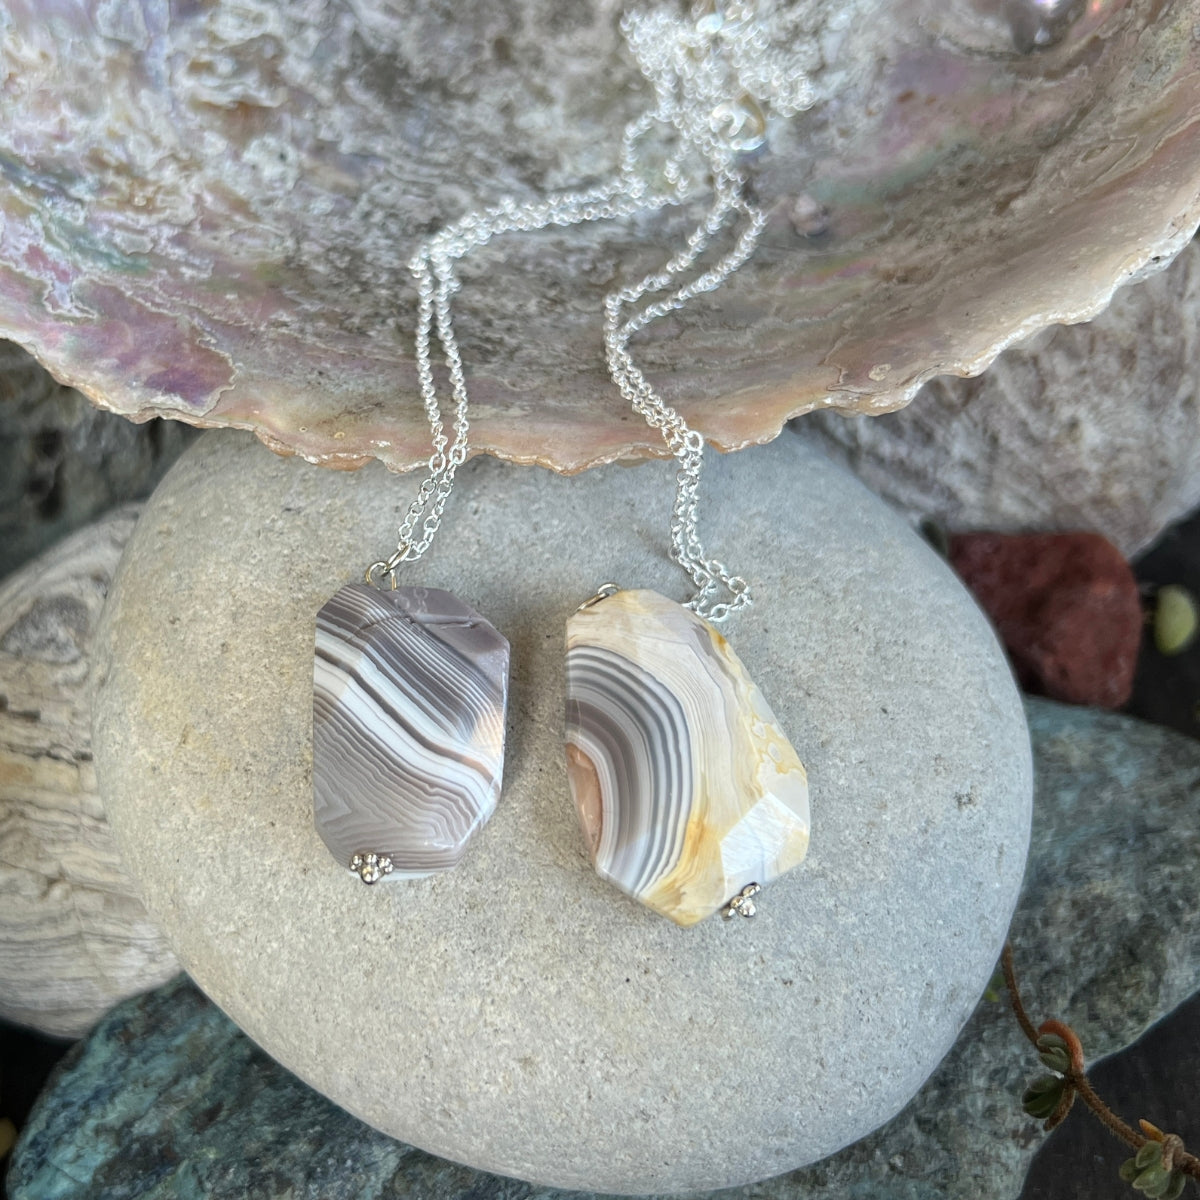 Agate is THE gemstone everyone should have for protection. Agate crystal is believed to enhance intelligence, and make its wearer more articulate. It attracts strength, protects from bad dreams, stress and energy drains. 